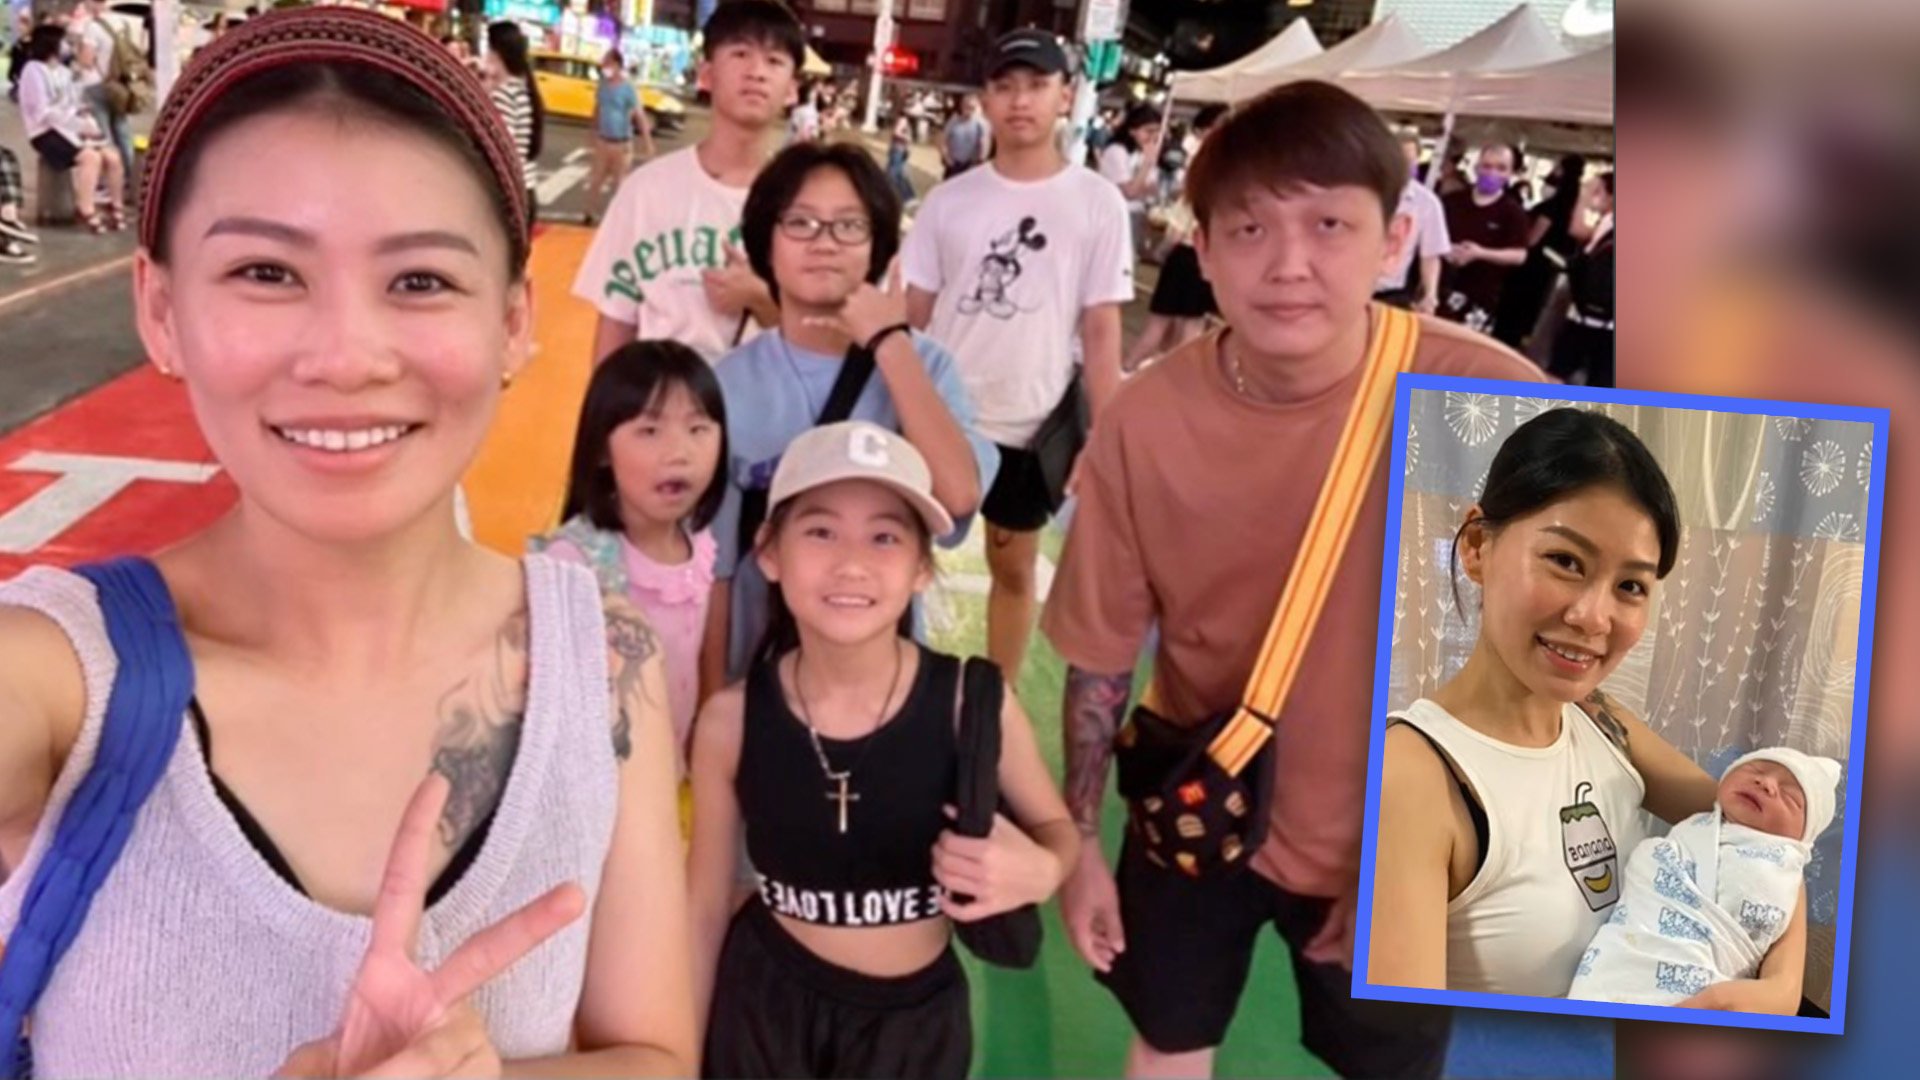 A mother-of-five influencer from Singapore, who has become a grandmother at the age of 34, says she will “support and guide” her 17-year-old son, the new father. Photo: SCMP composite/Instagram